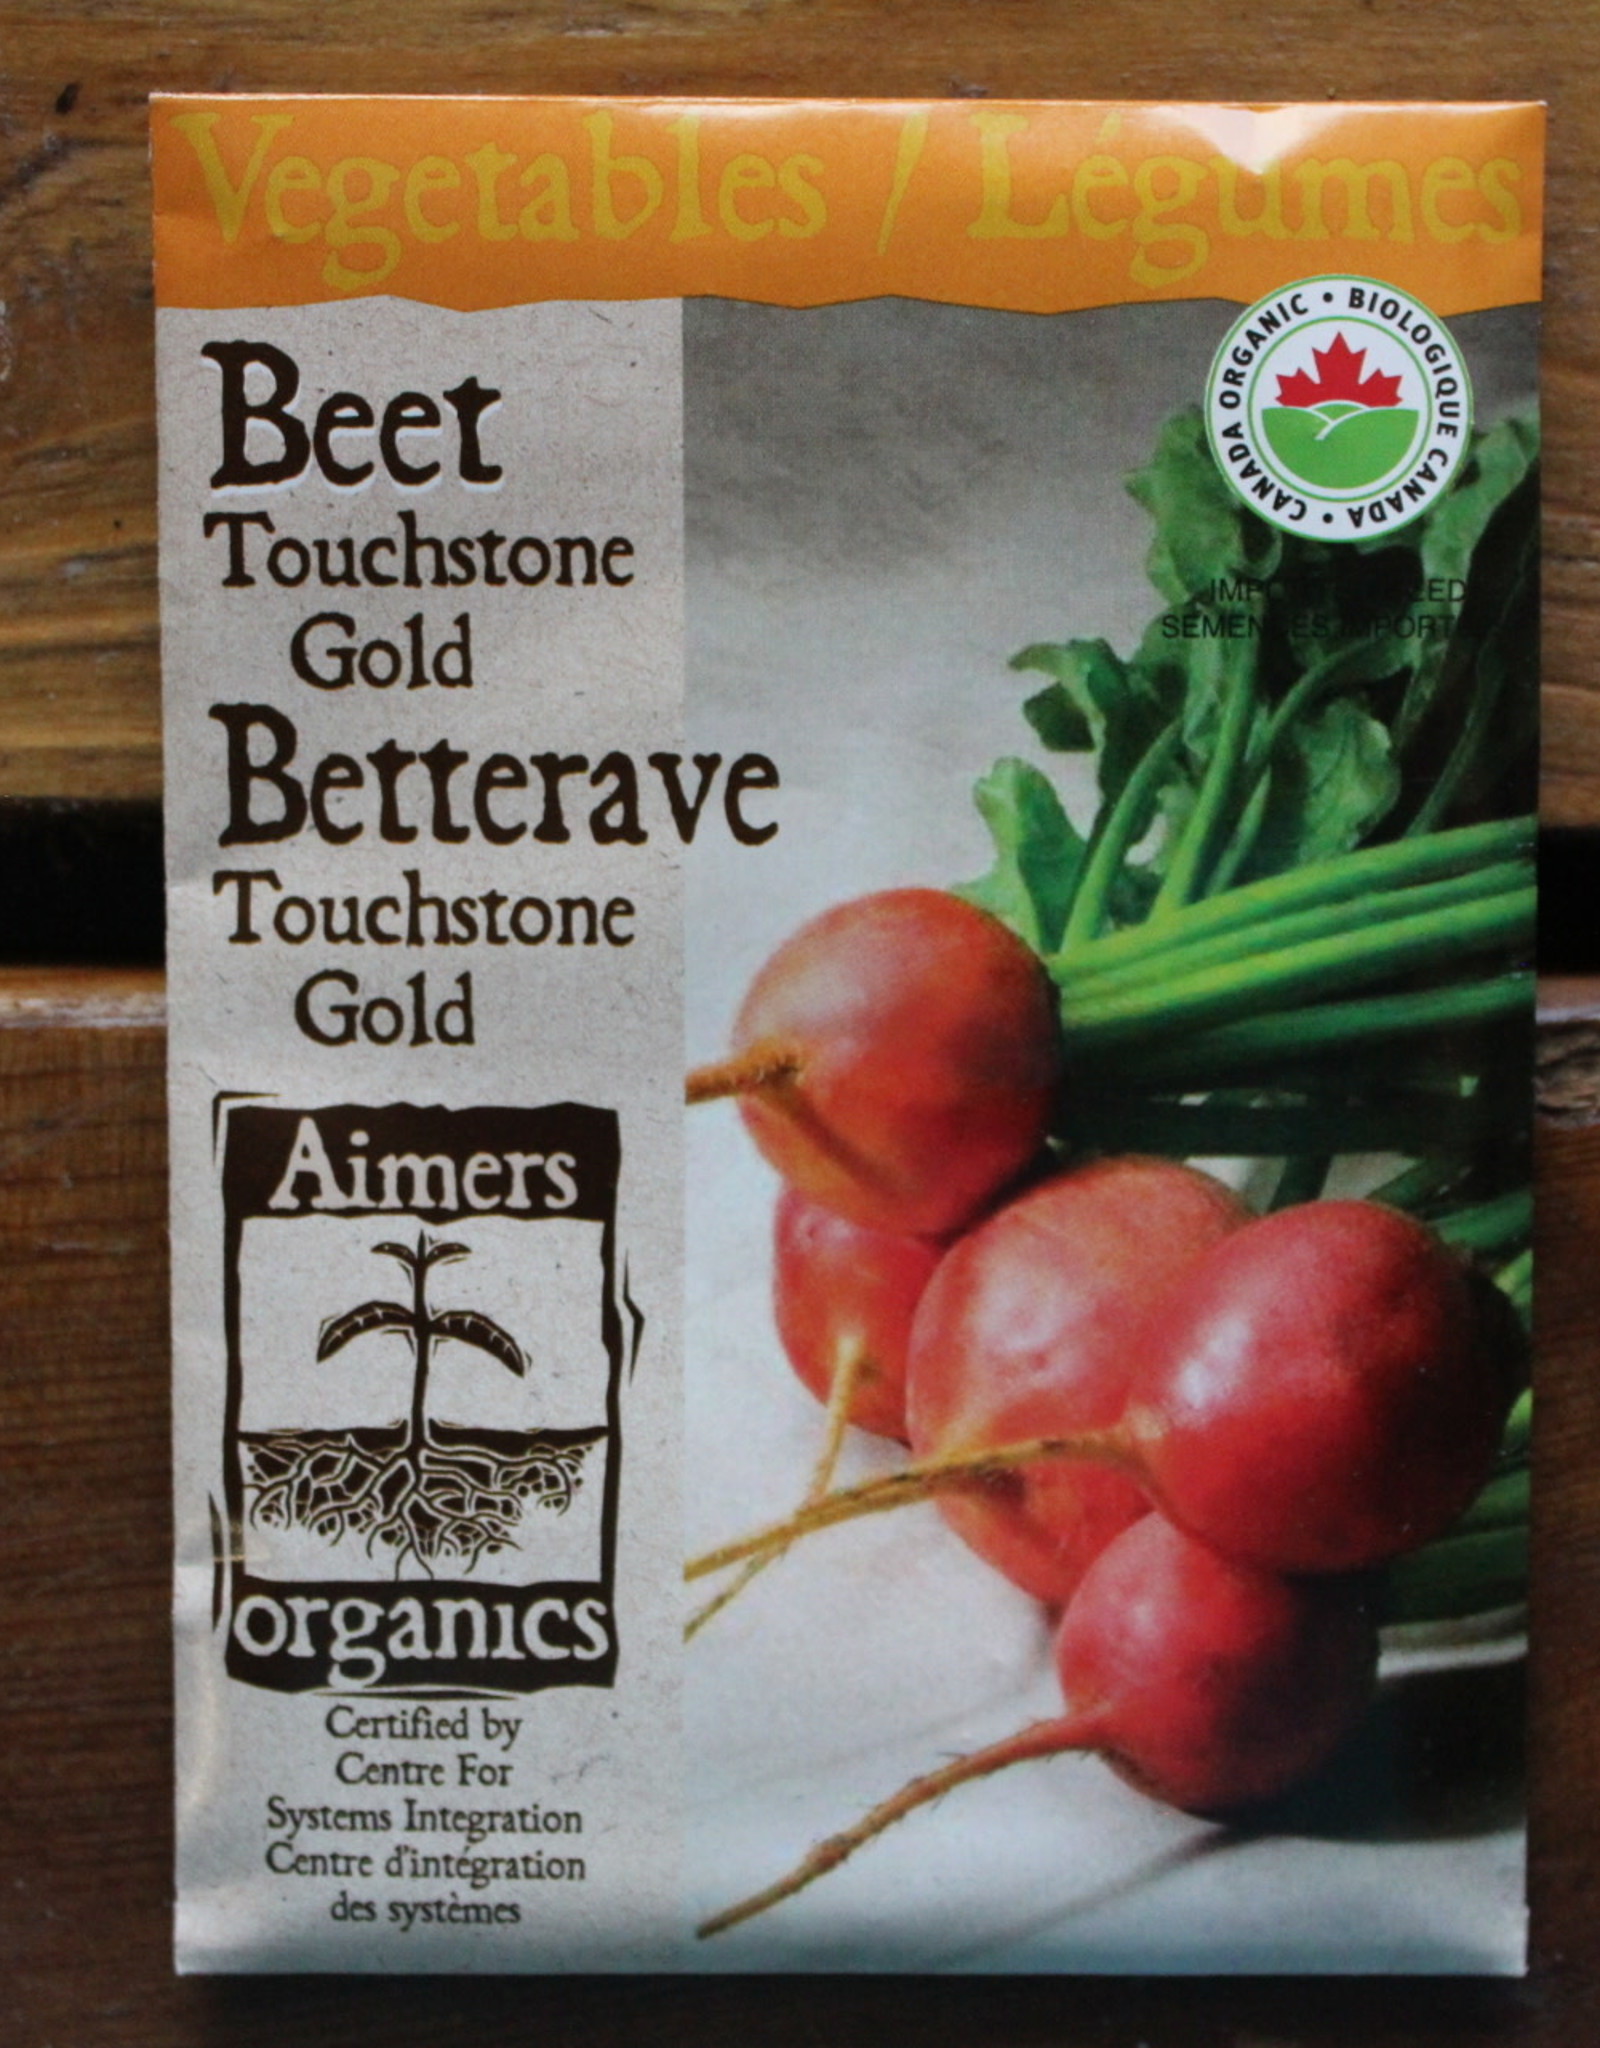 Aimers Beet - Touchstone Gold